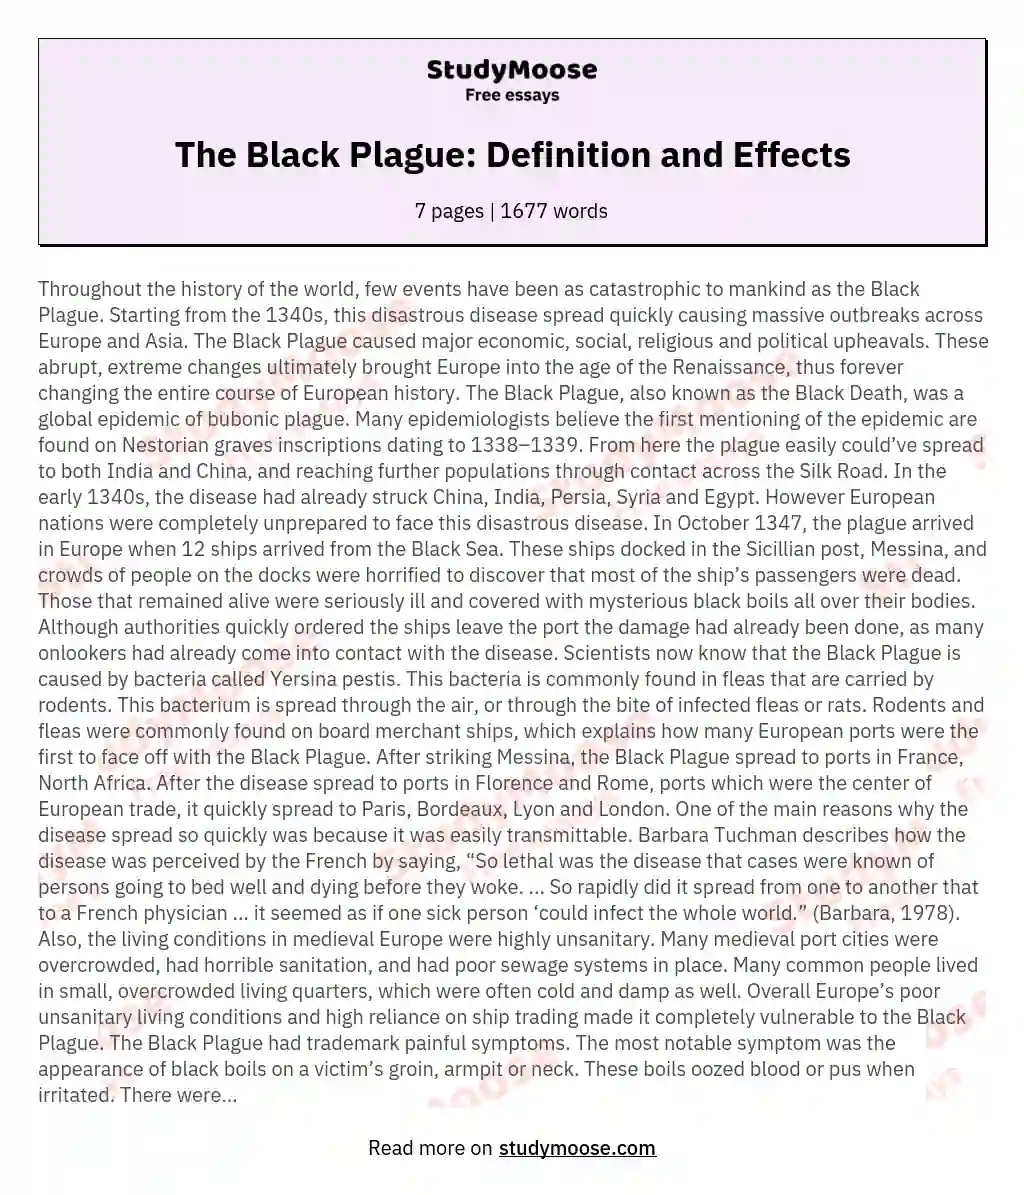 The Black Plague: Definition and Effects essay